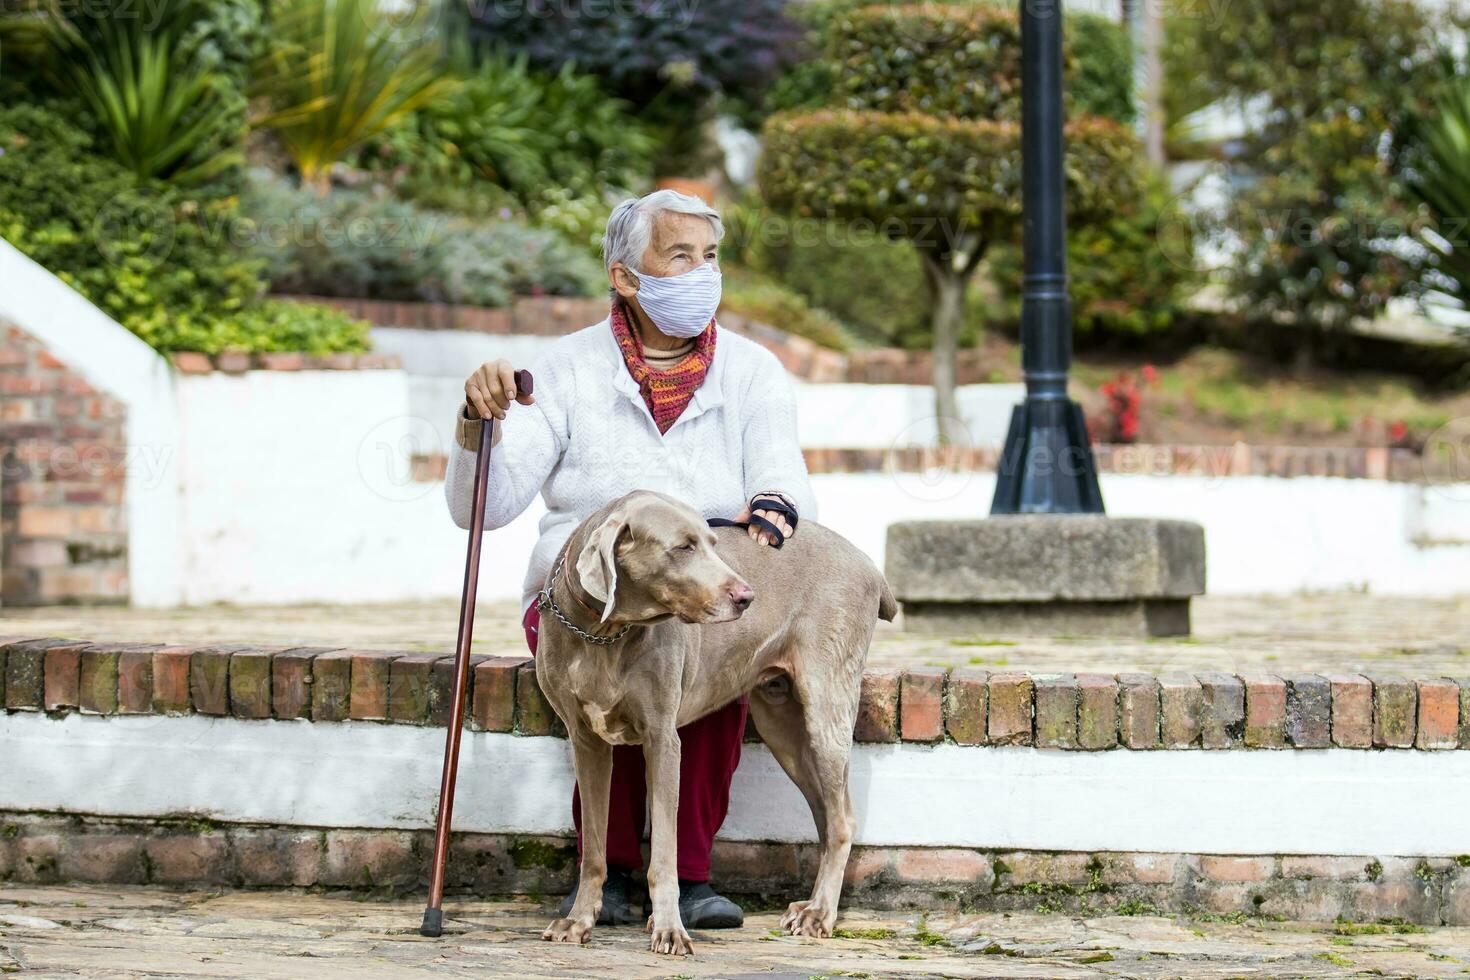 Senior woman wearing a home made face mask and enjoying some time outdoors with her pet during the coronavirus quarantine de escalation photo